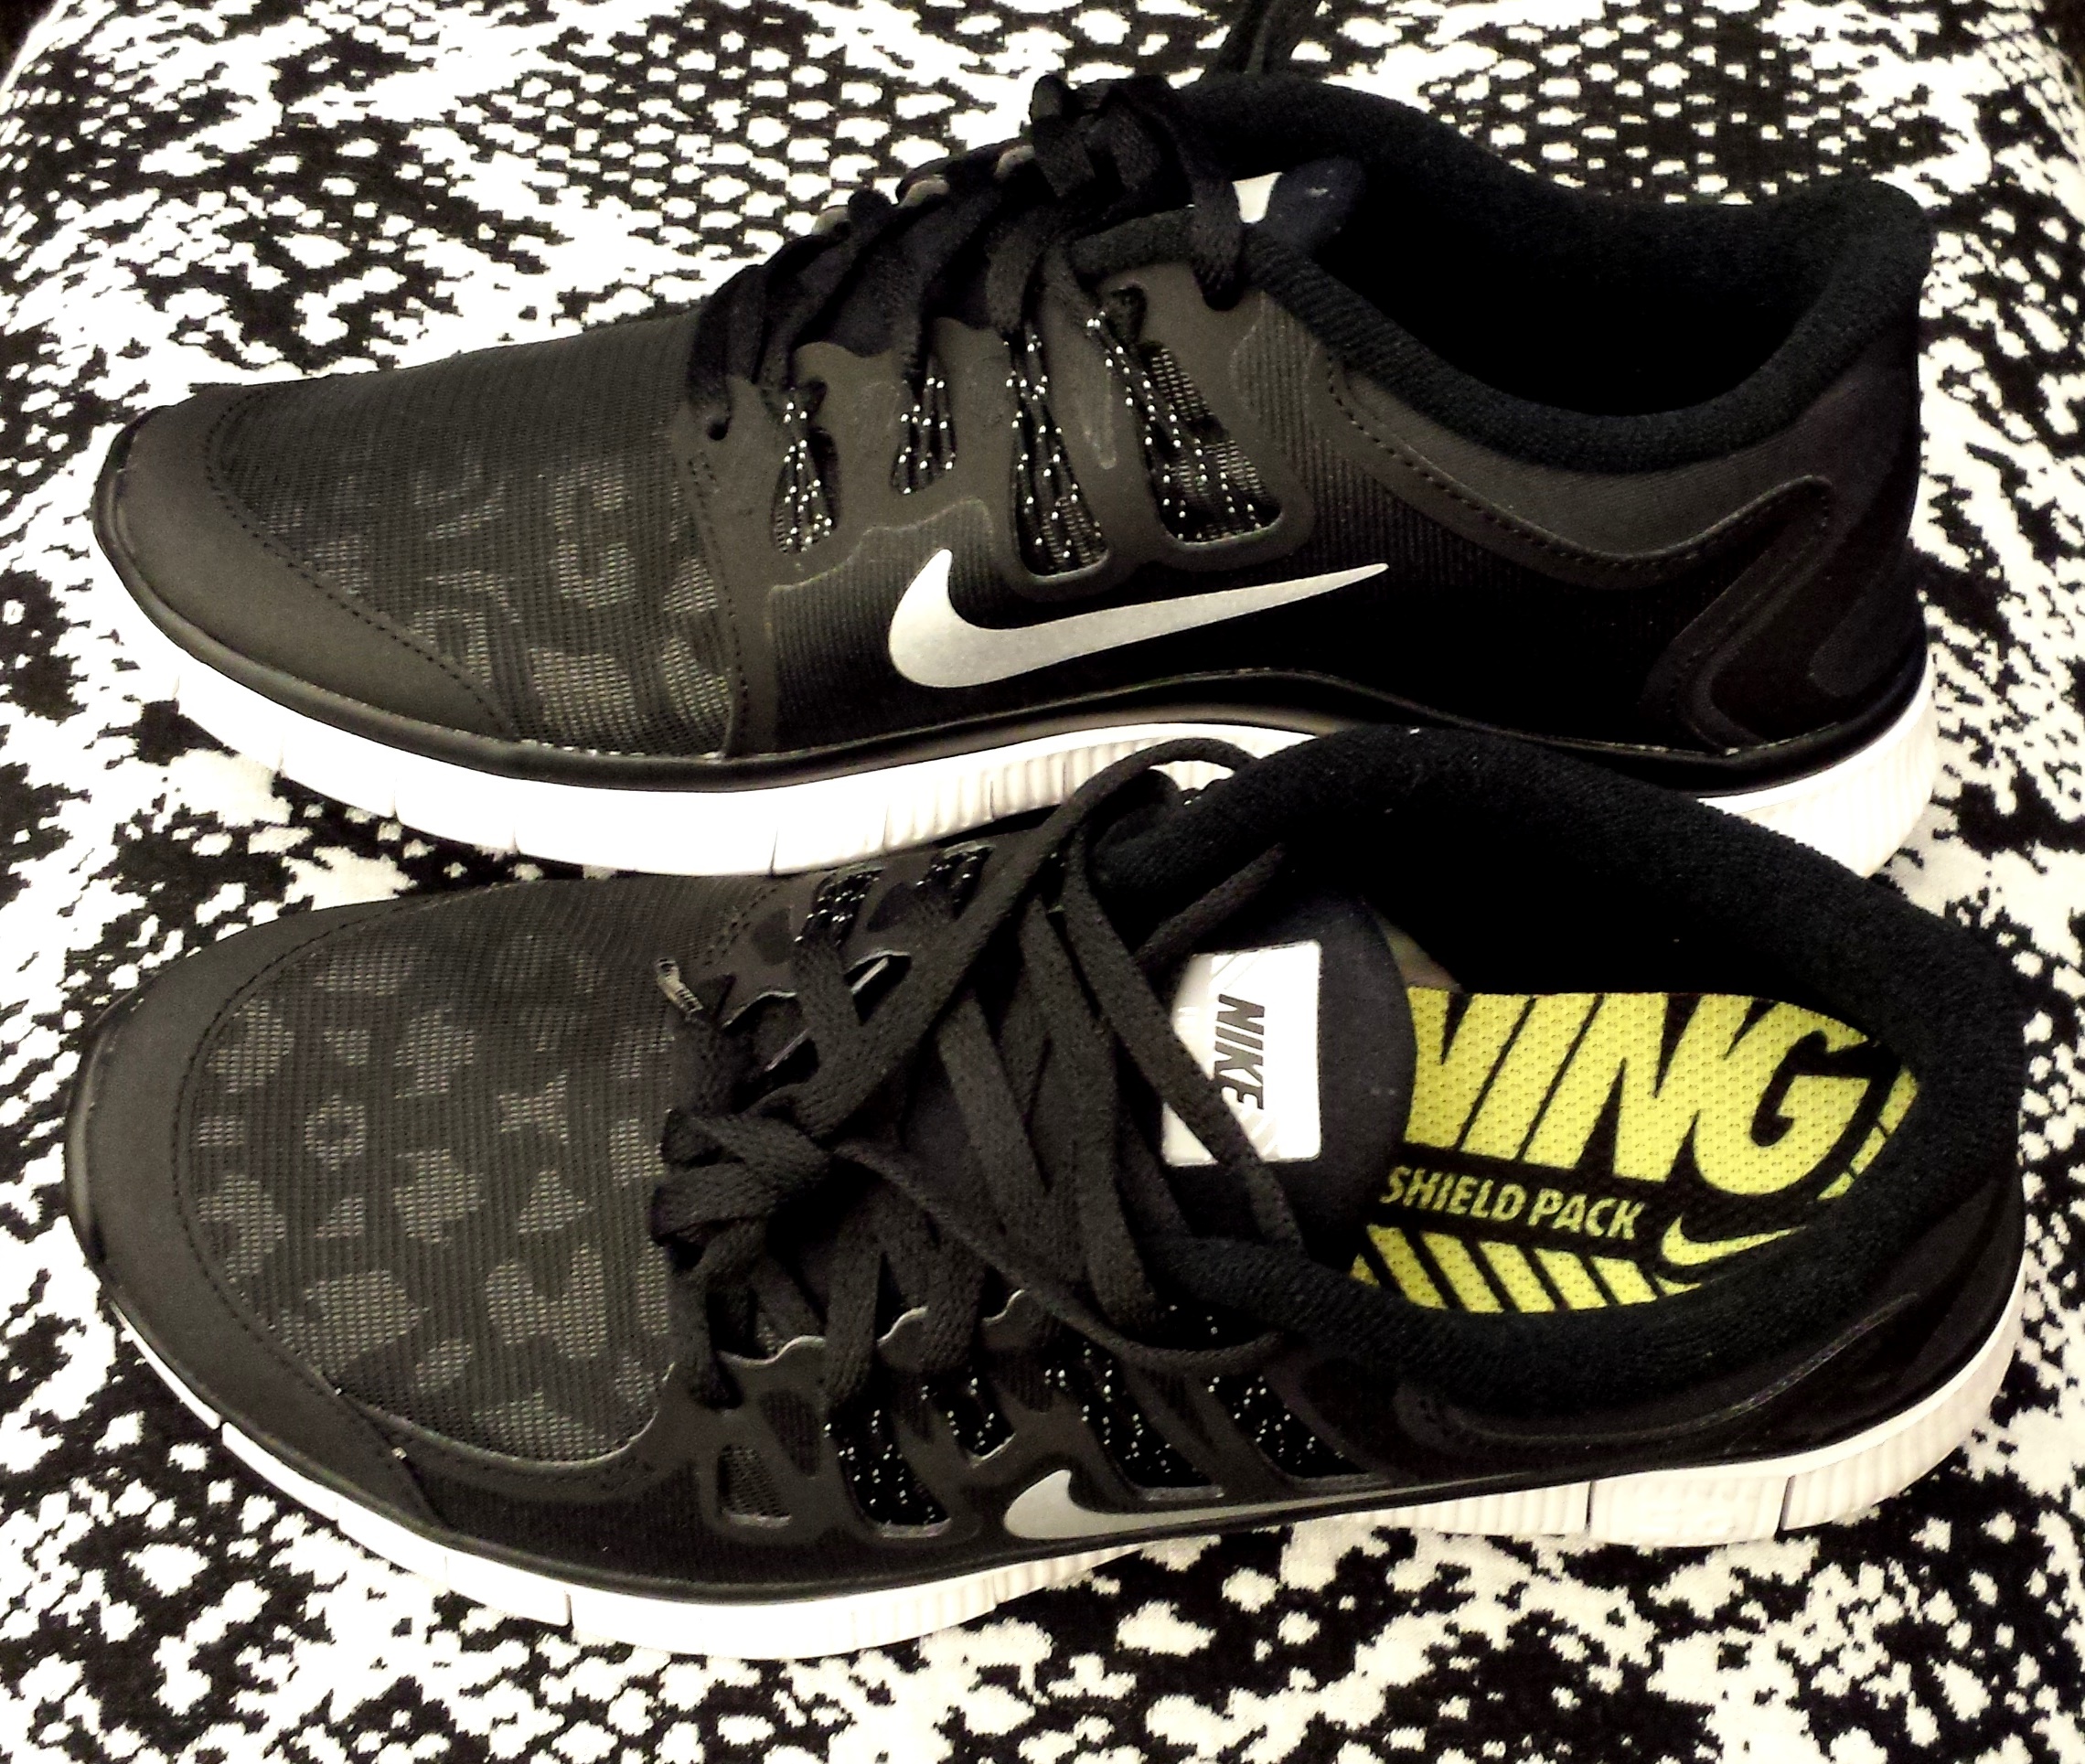 Nike Free 5.0 Shield Running Shoes Review |